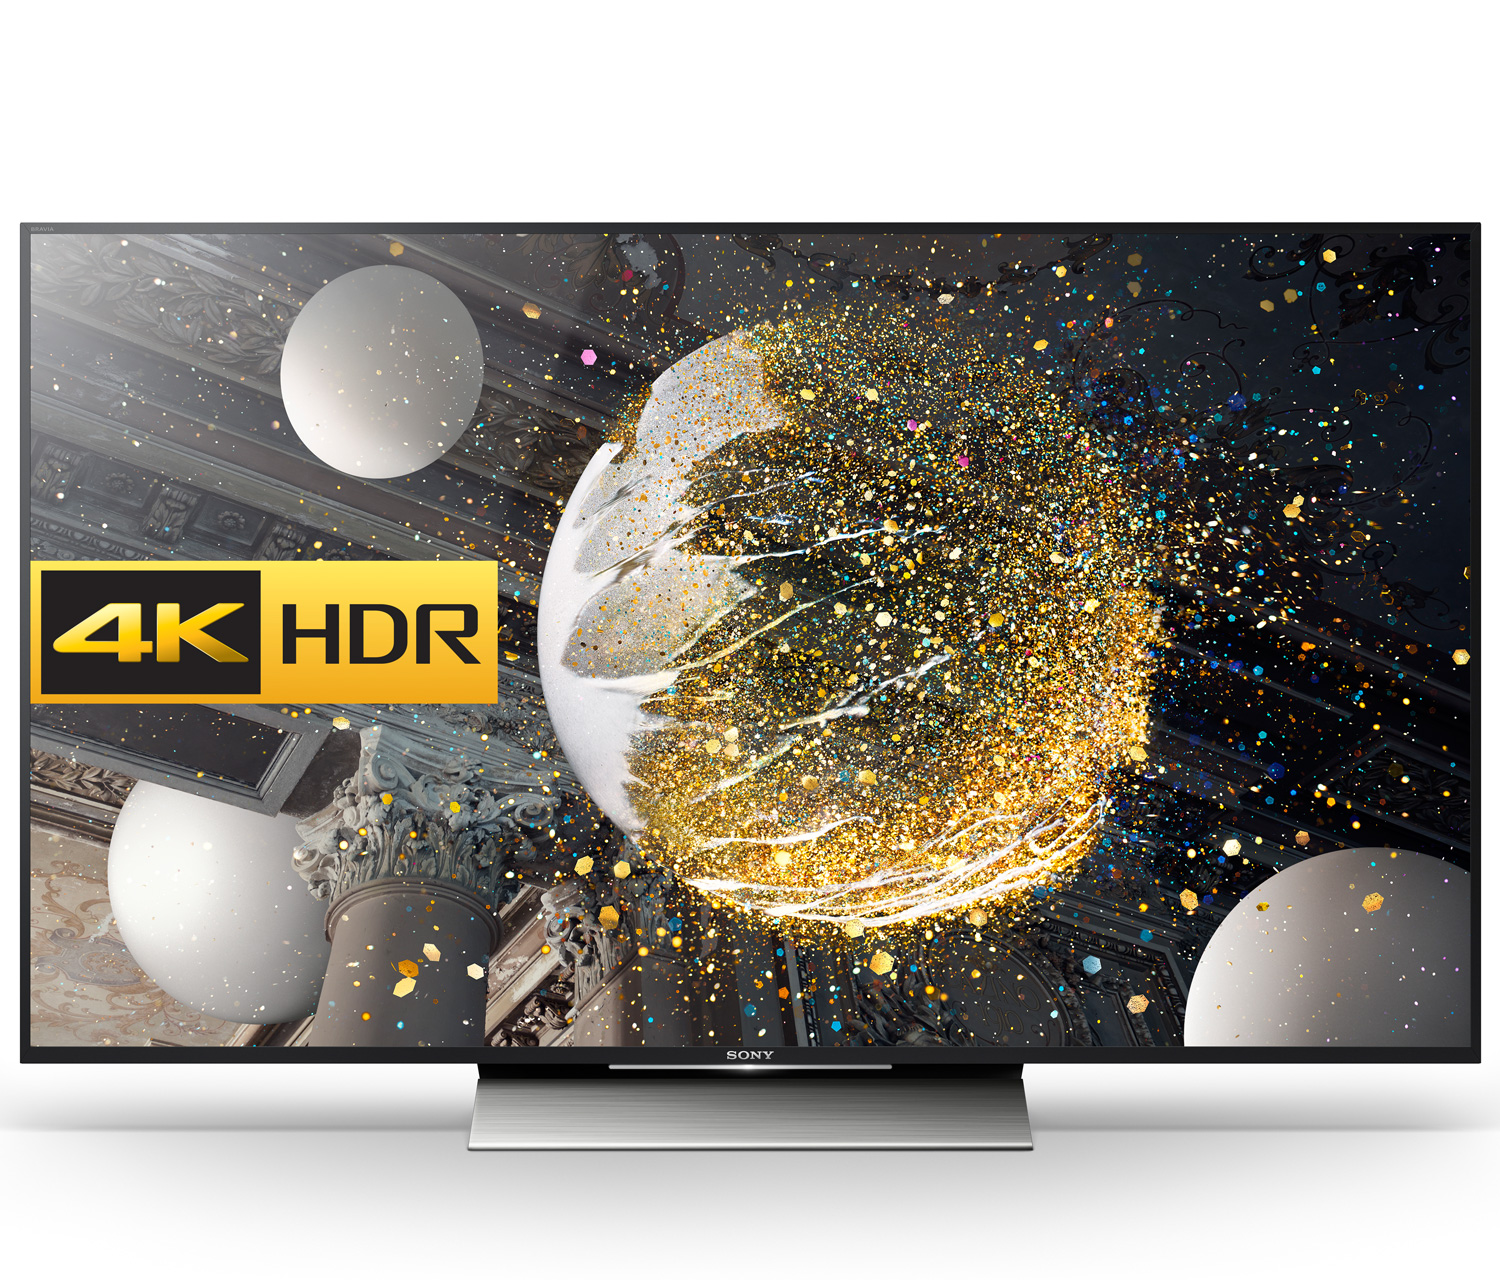 Black Friday UK televisions deals and discounts